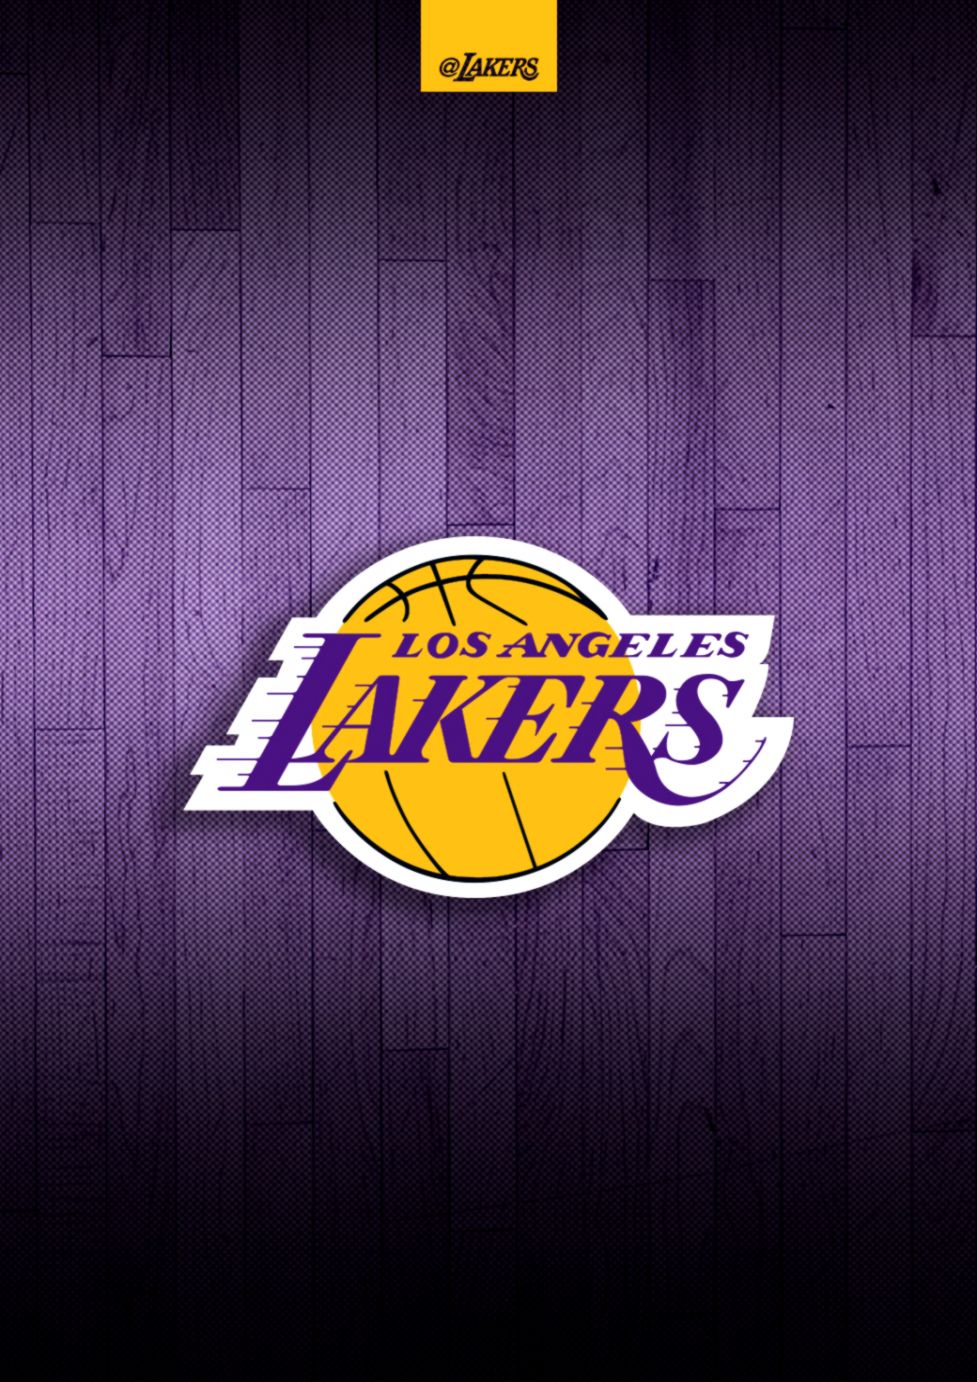 Lakers february wallpaper 2017 (93 Wallpapers) - HD Wallpapers